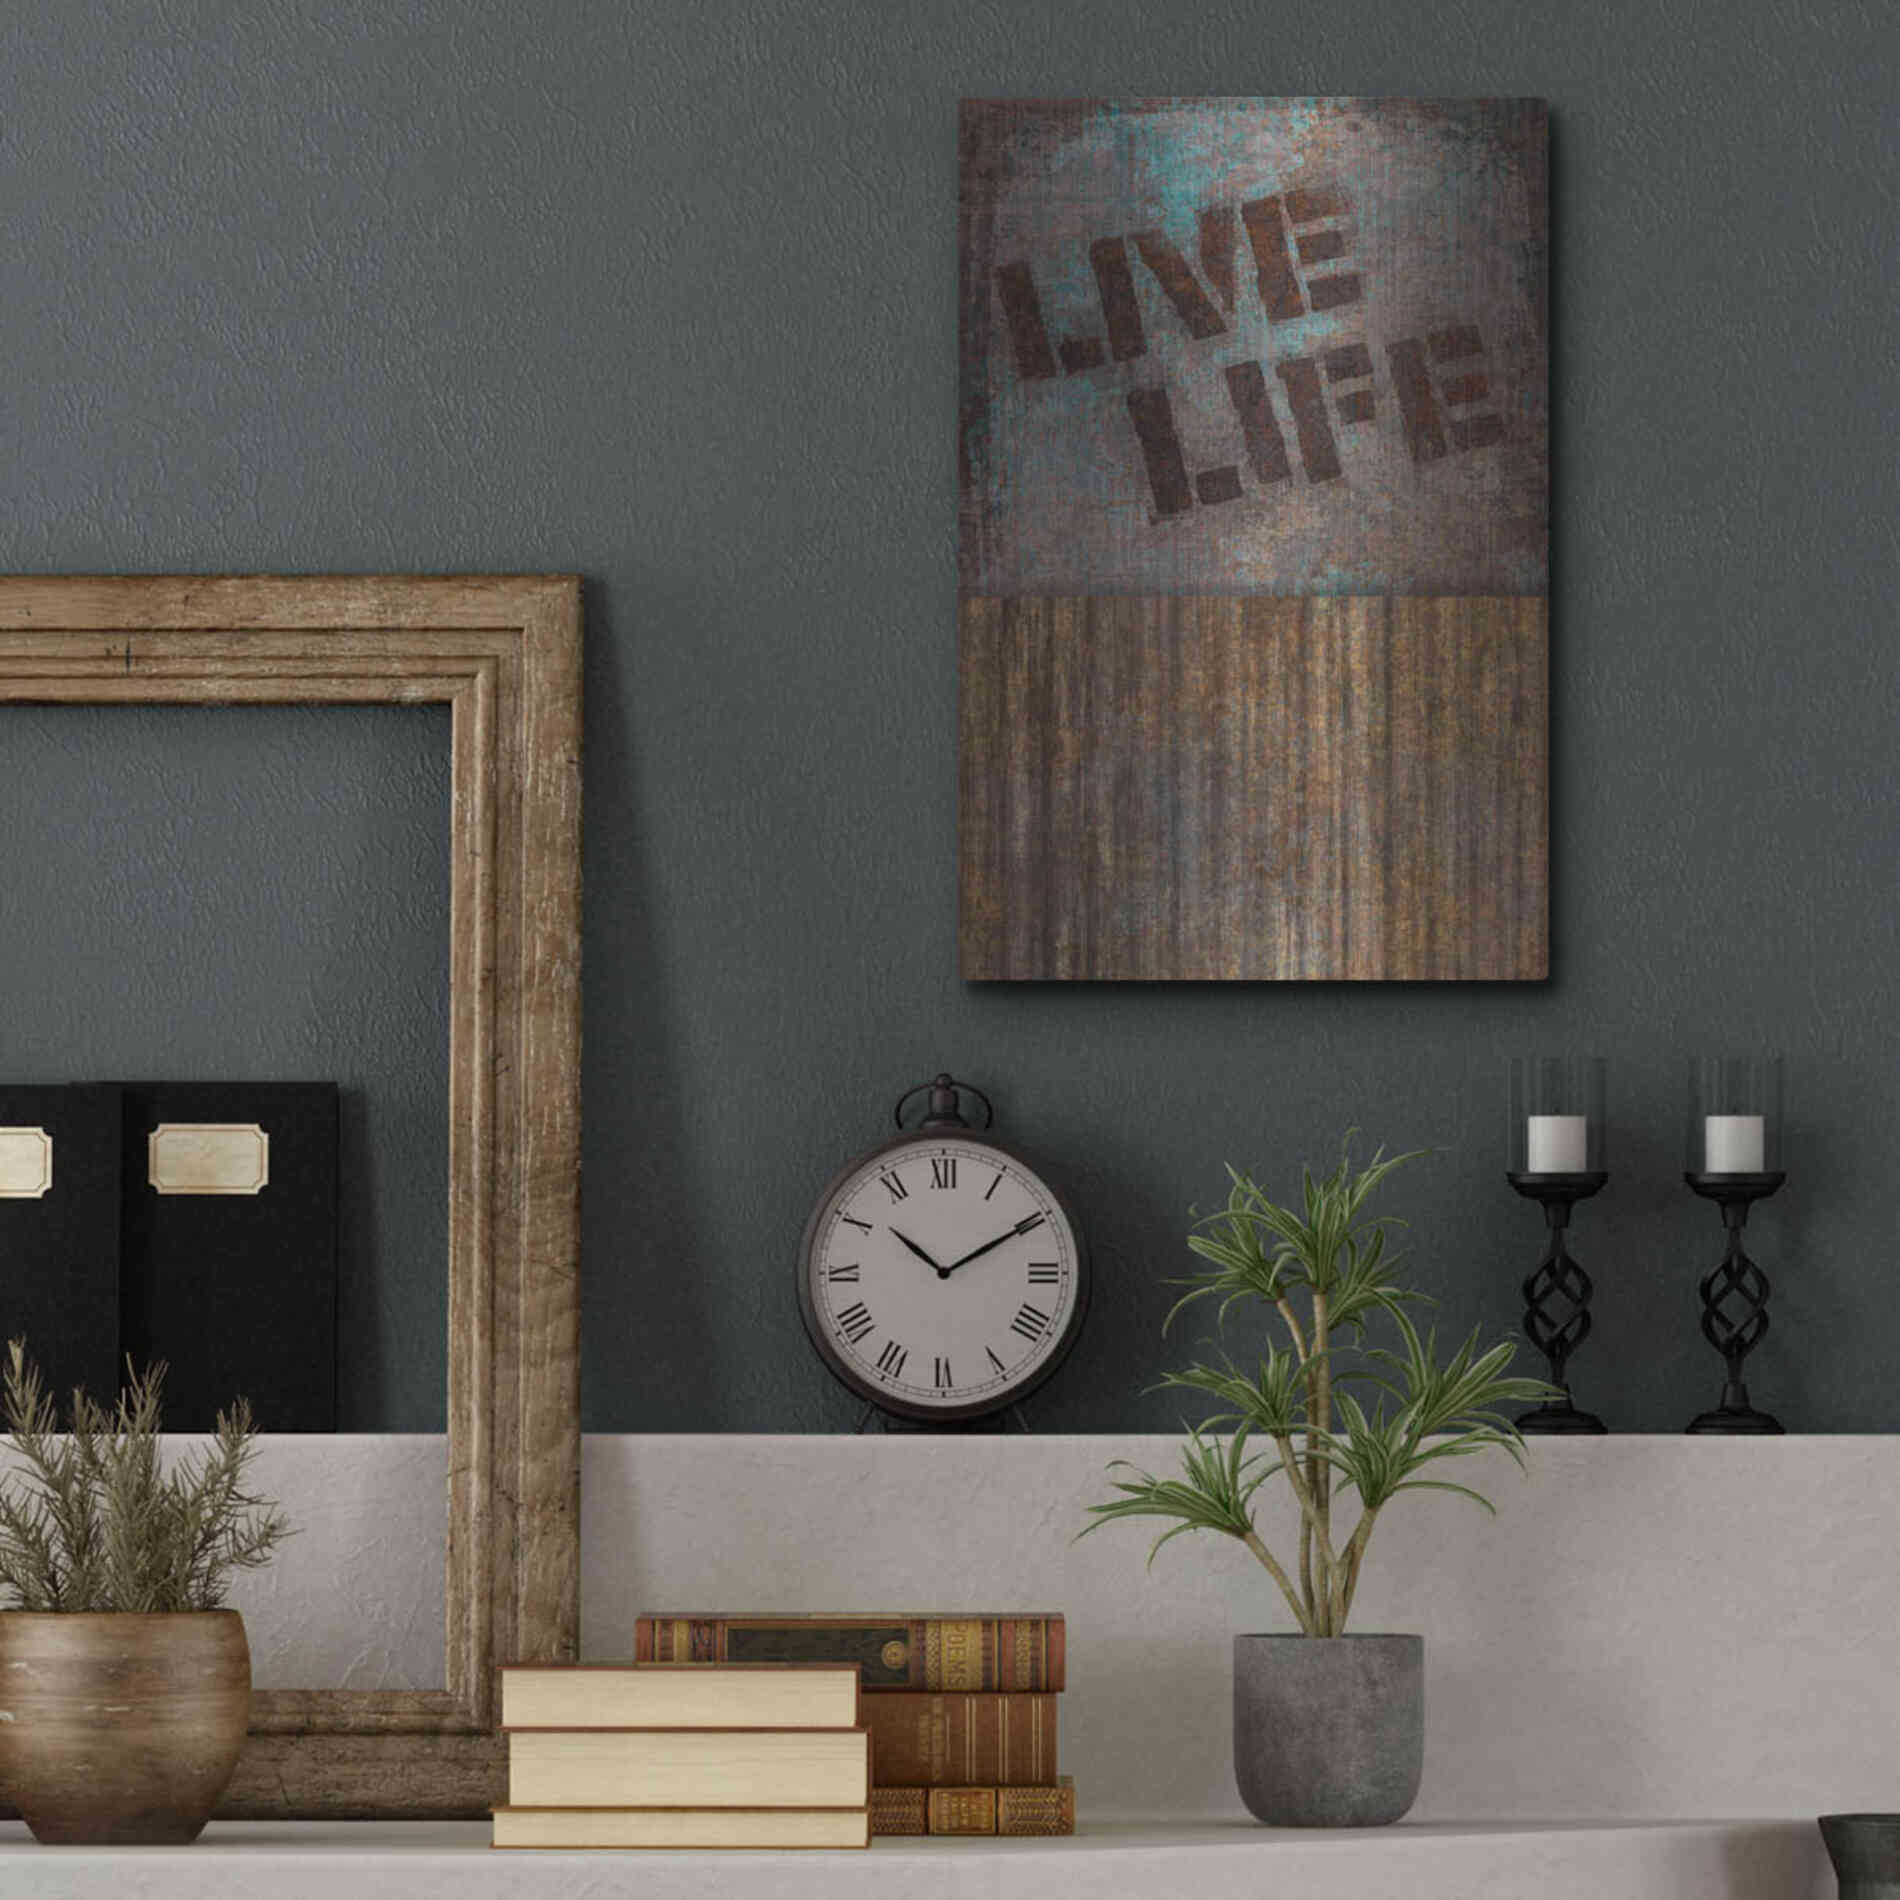 Luxe Metal Art 'Live Life' by Andrea Haase, Metal Wall At,12x16